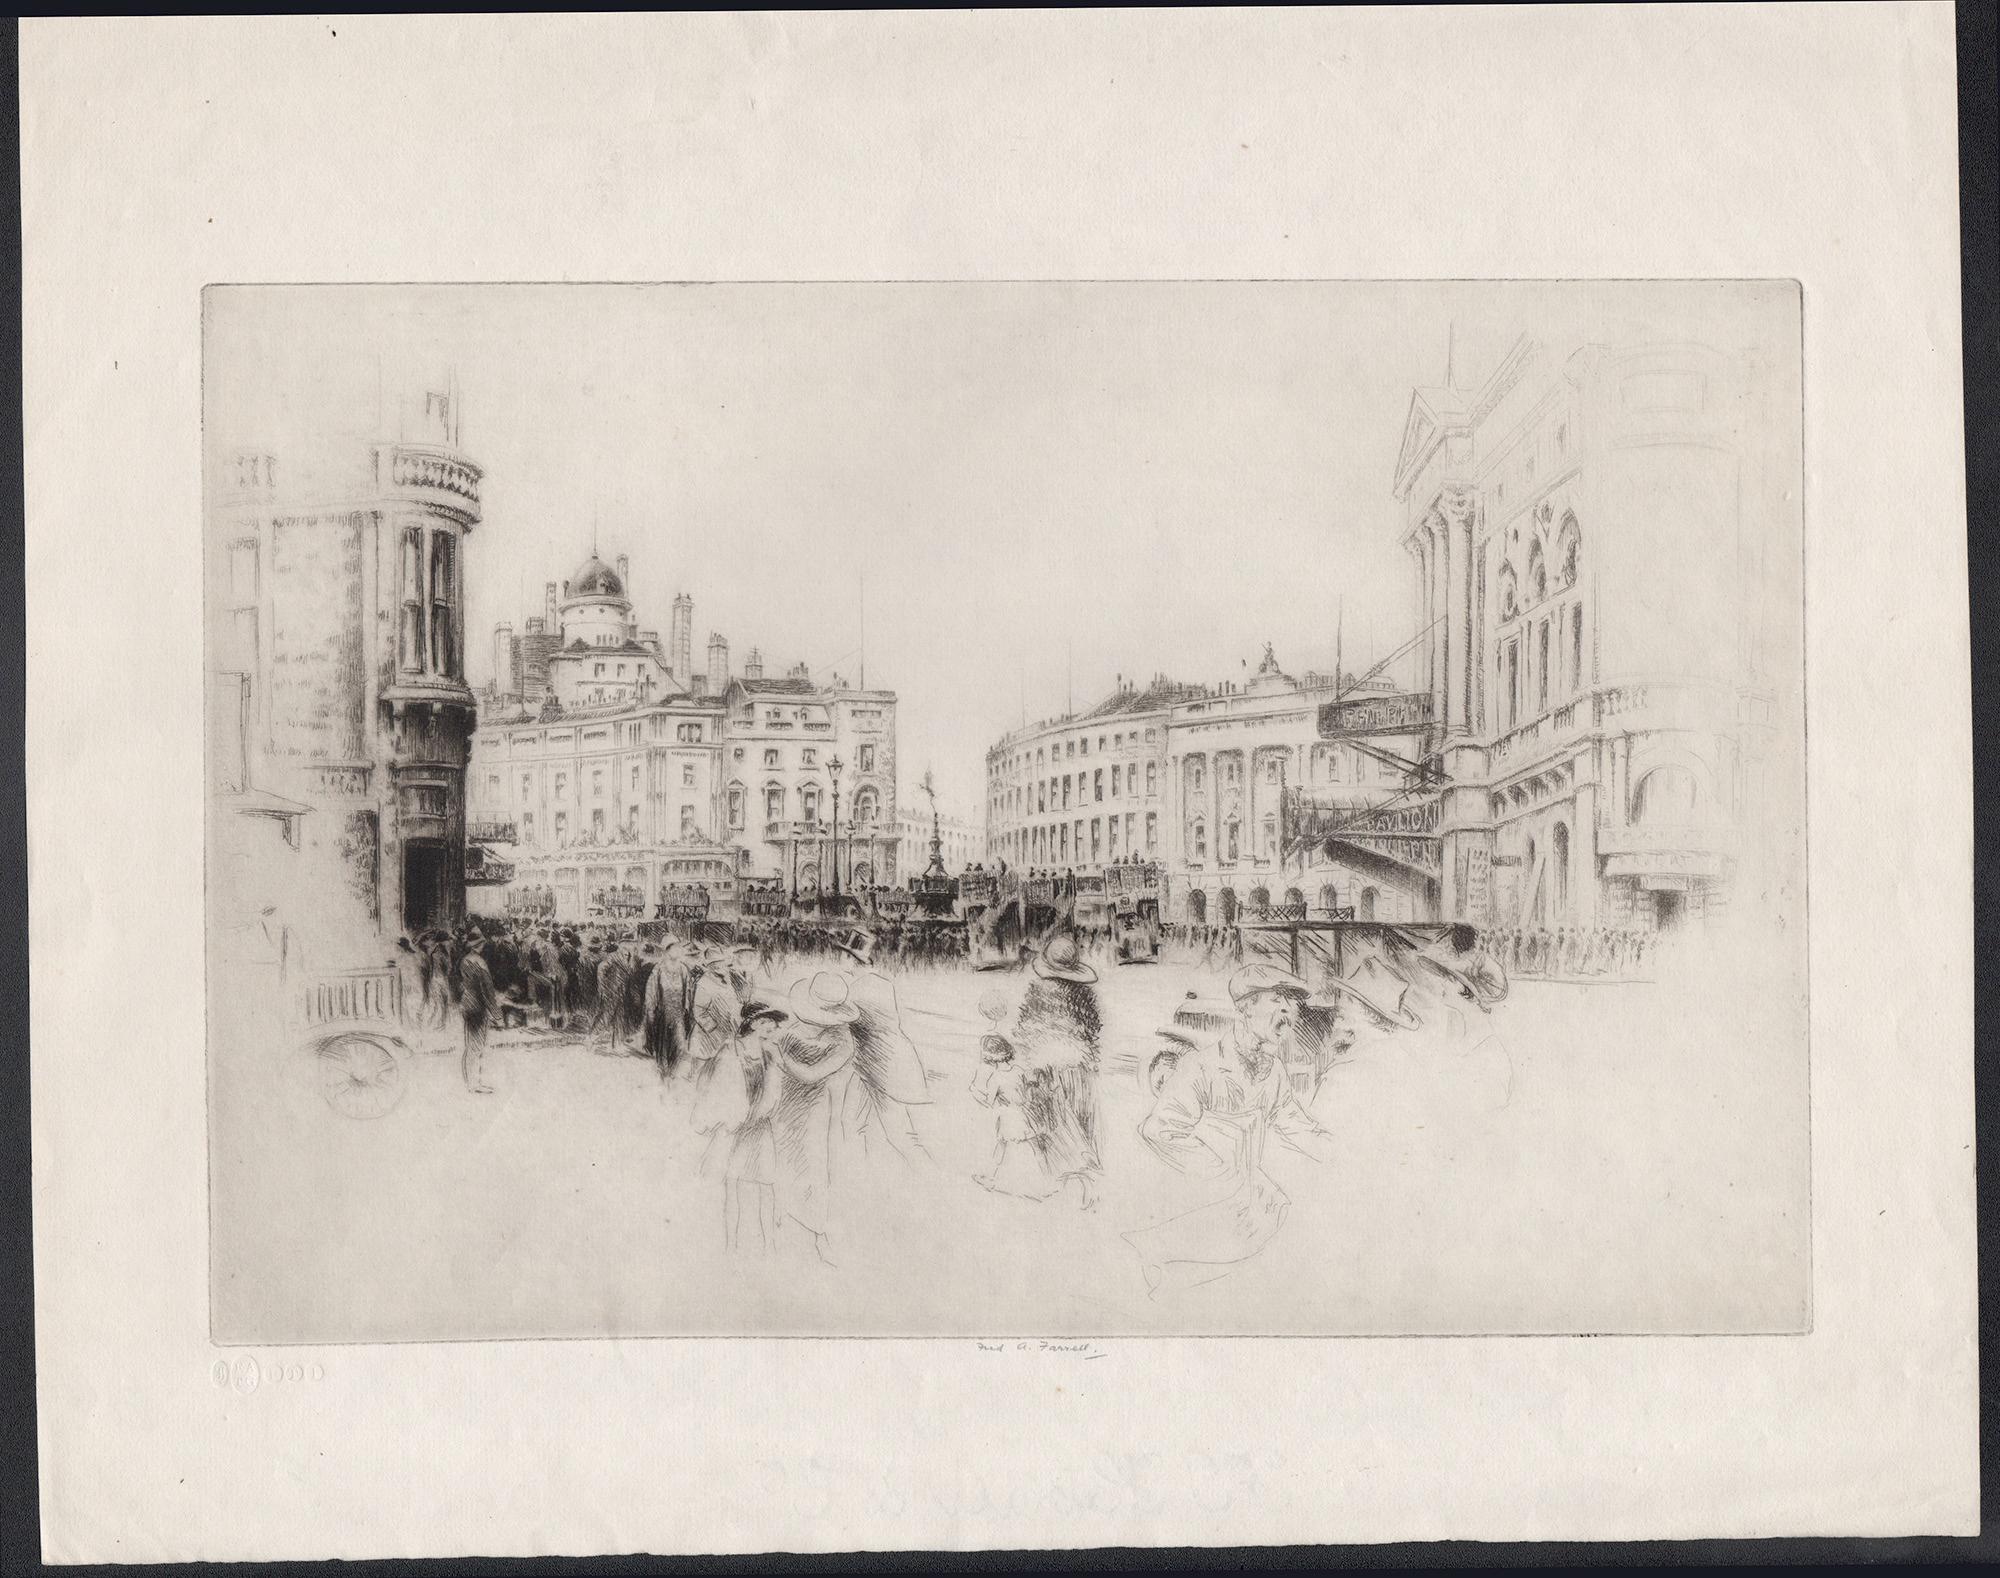 Signed in pencil below the image by the artist. Blind stamps of etching societies lower left just under the image.

Frederick Farrell was a Scottish etcher specializing in architectural etchings. He was the Official Artist with the 51st Highlanders